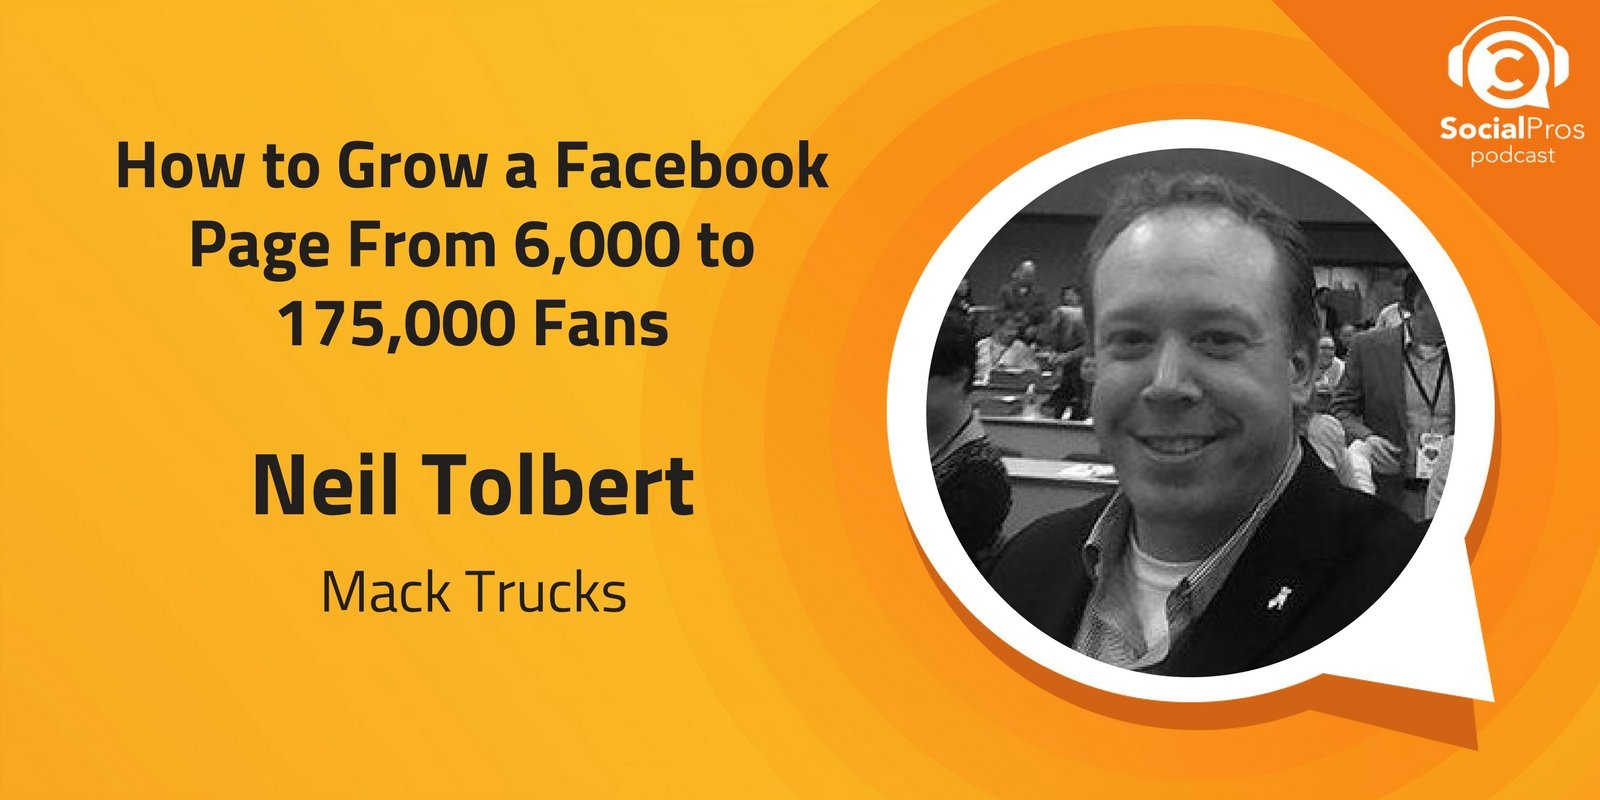 How to Grow a Facebook Page From 6,000 to 175,000 Fans